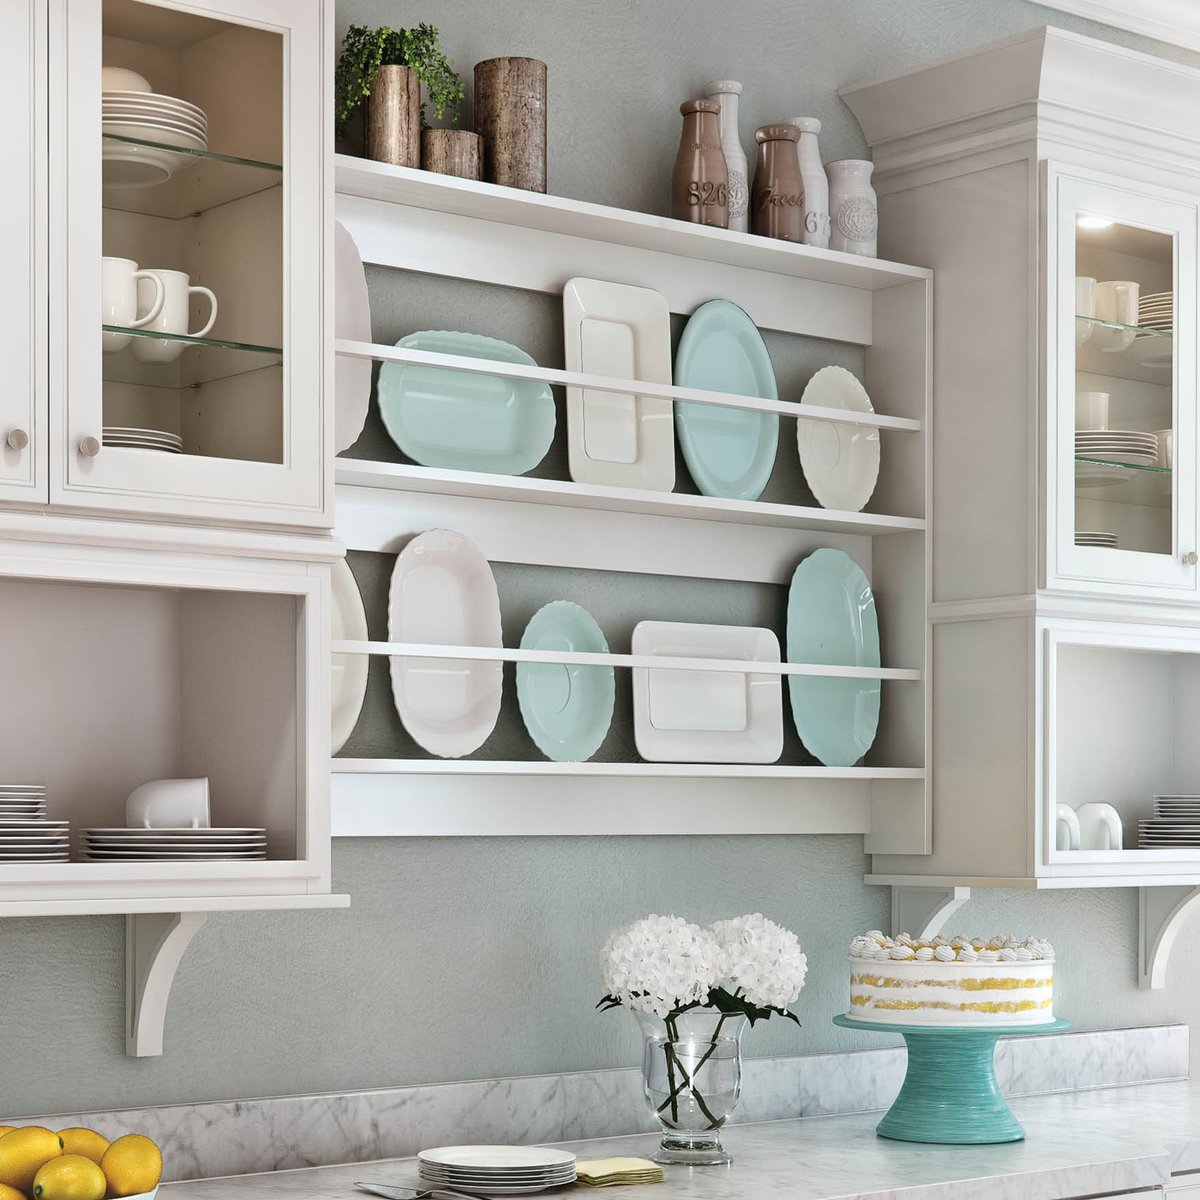 Happy Easter from Waypoint Living Spaces! Hutch shown in 760 Painted Linen.
waypointlivingspaces.com/cabinet/760/Pa…
#waypointlivingspaces #kitchencabinets #PaintedLinen